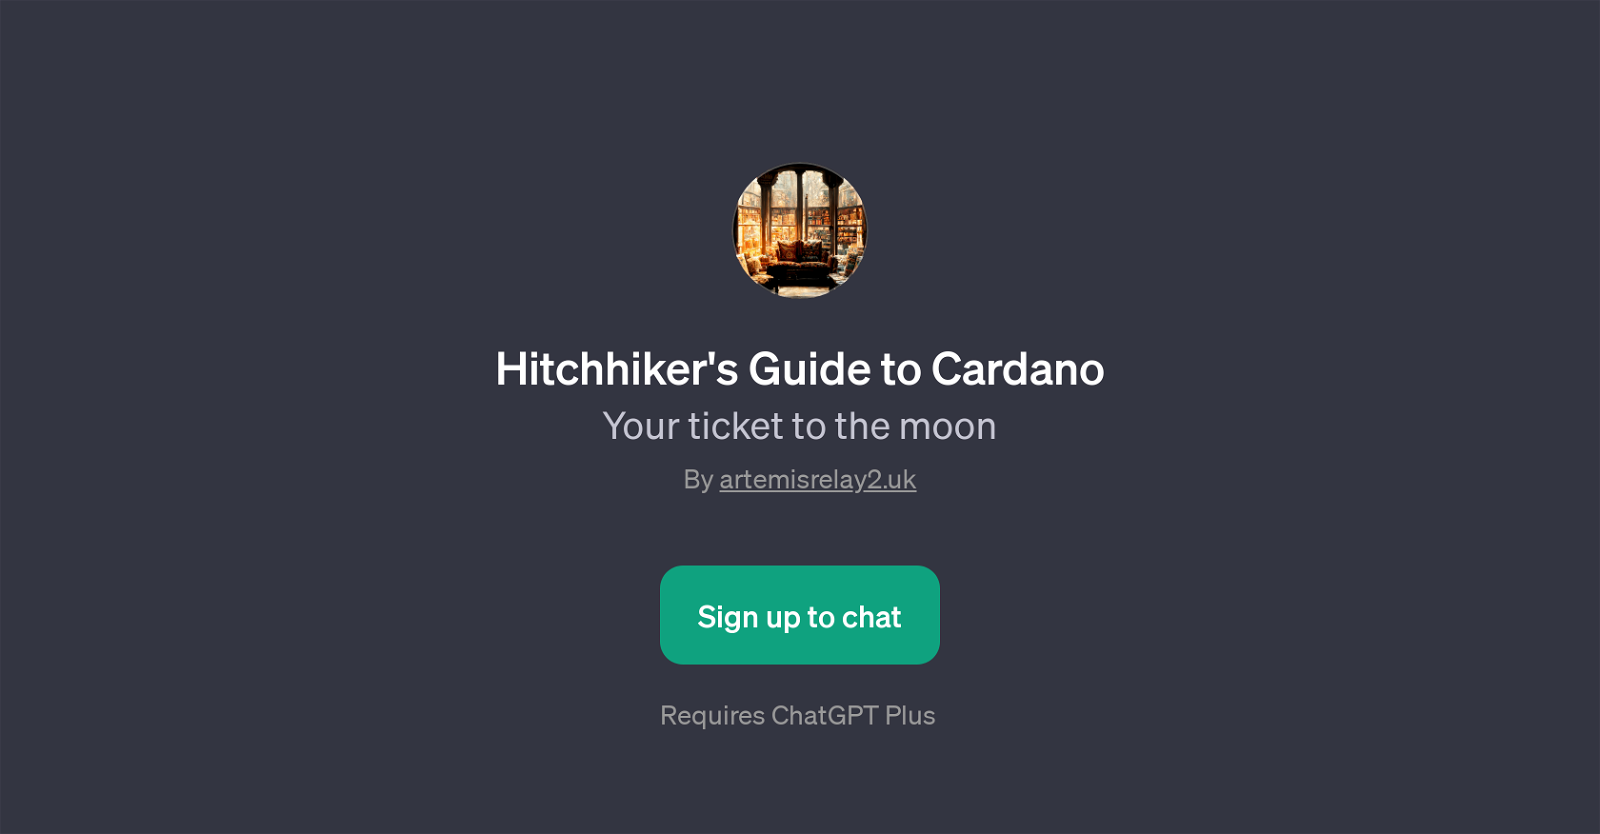 Hitchhiker's Guide to Cardano website